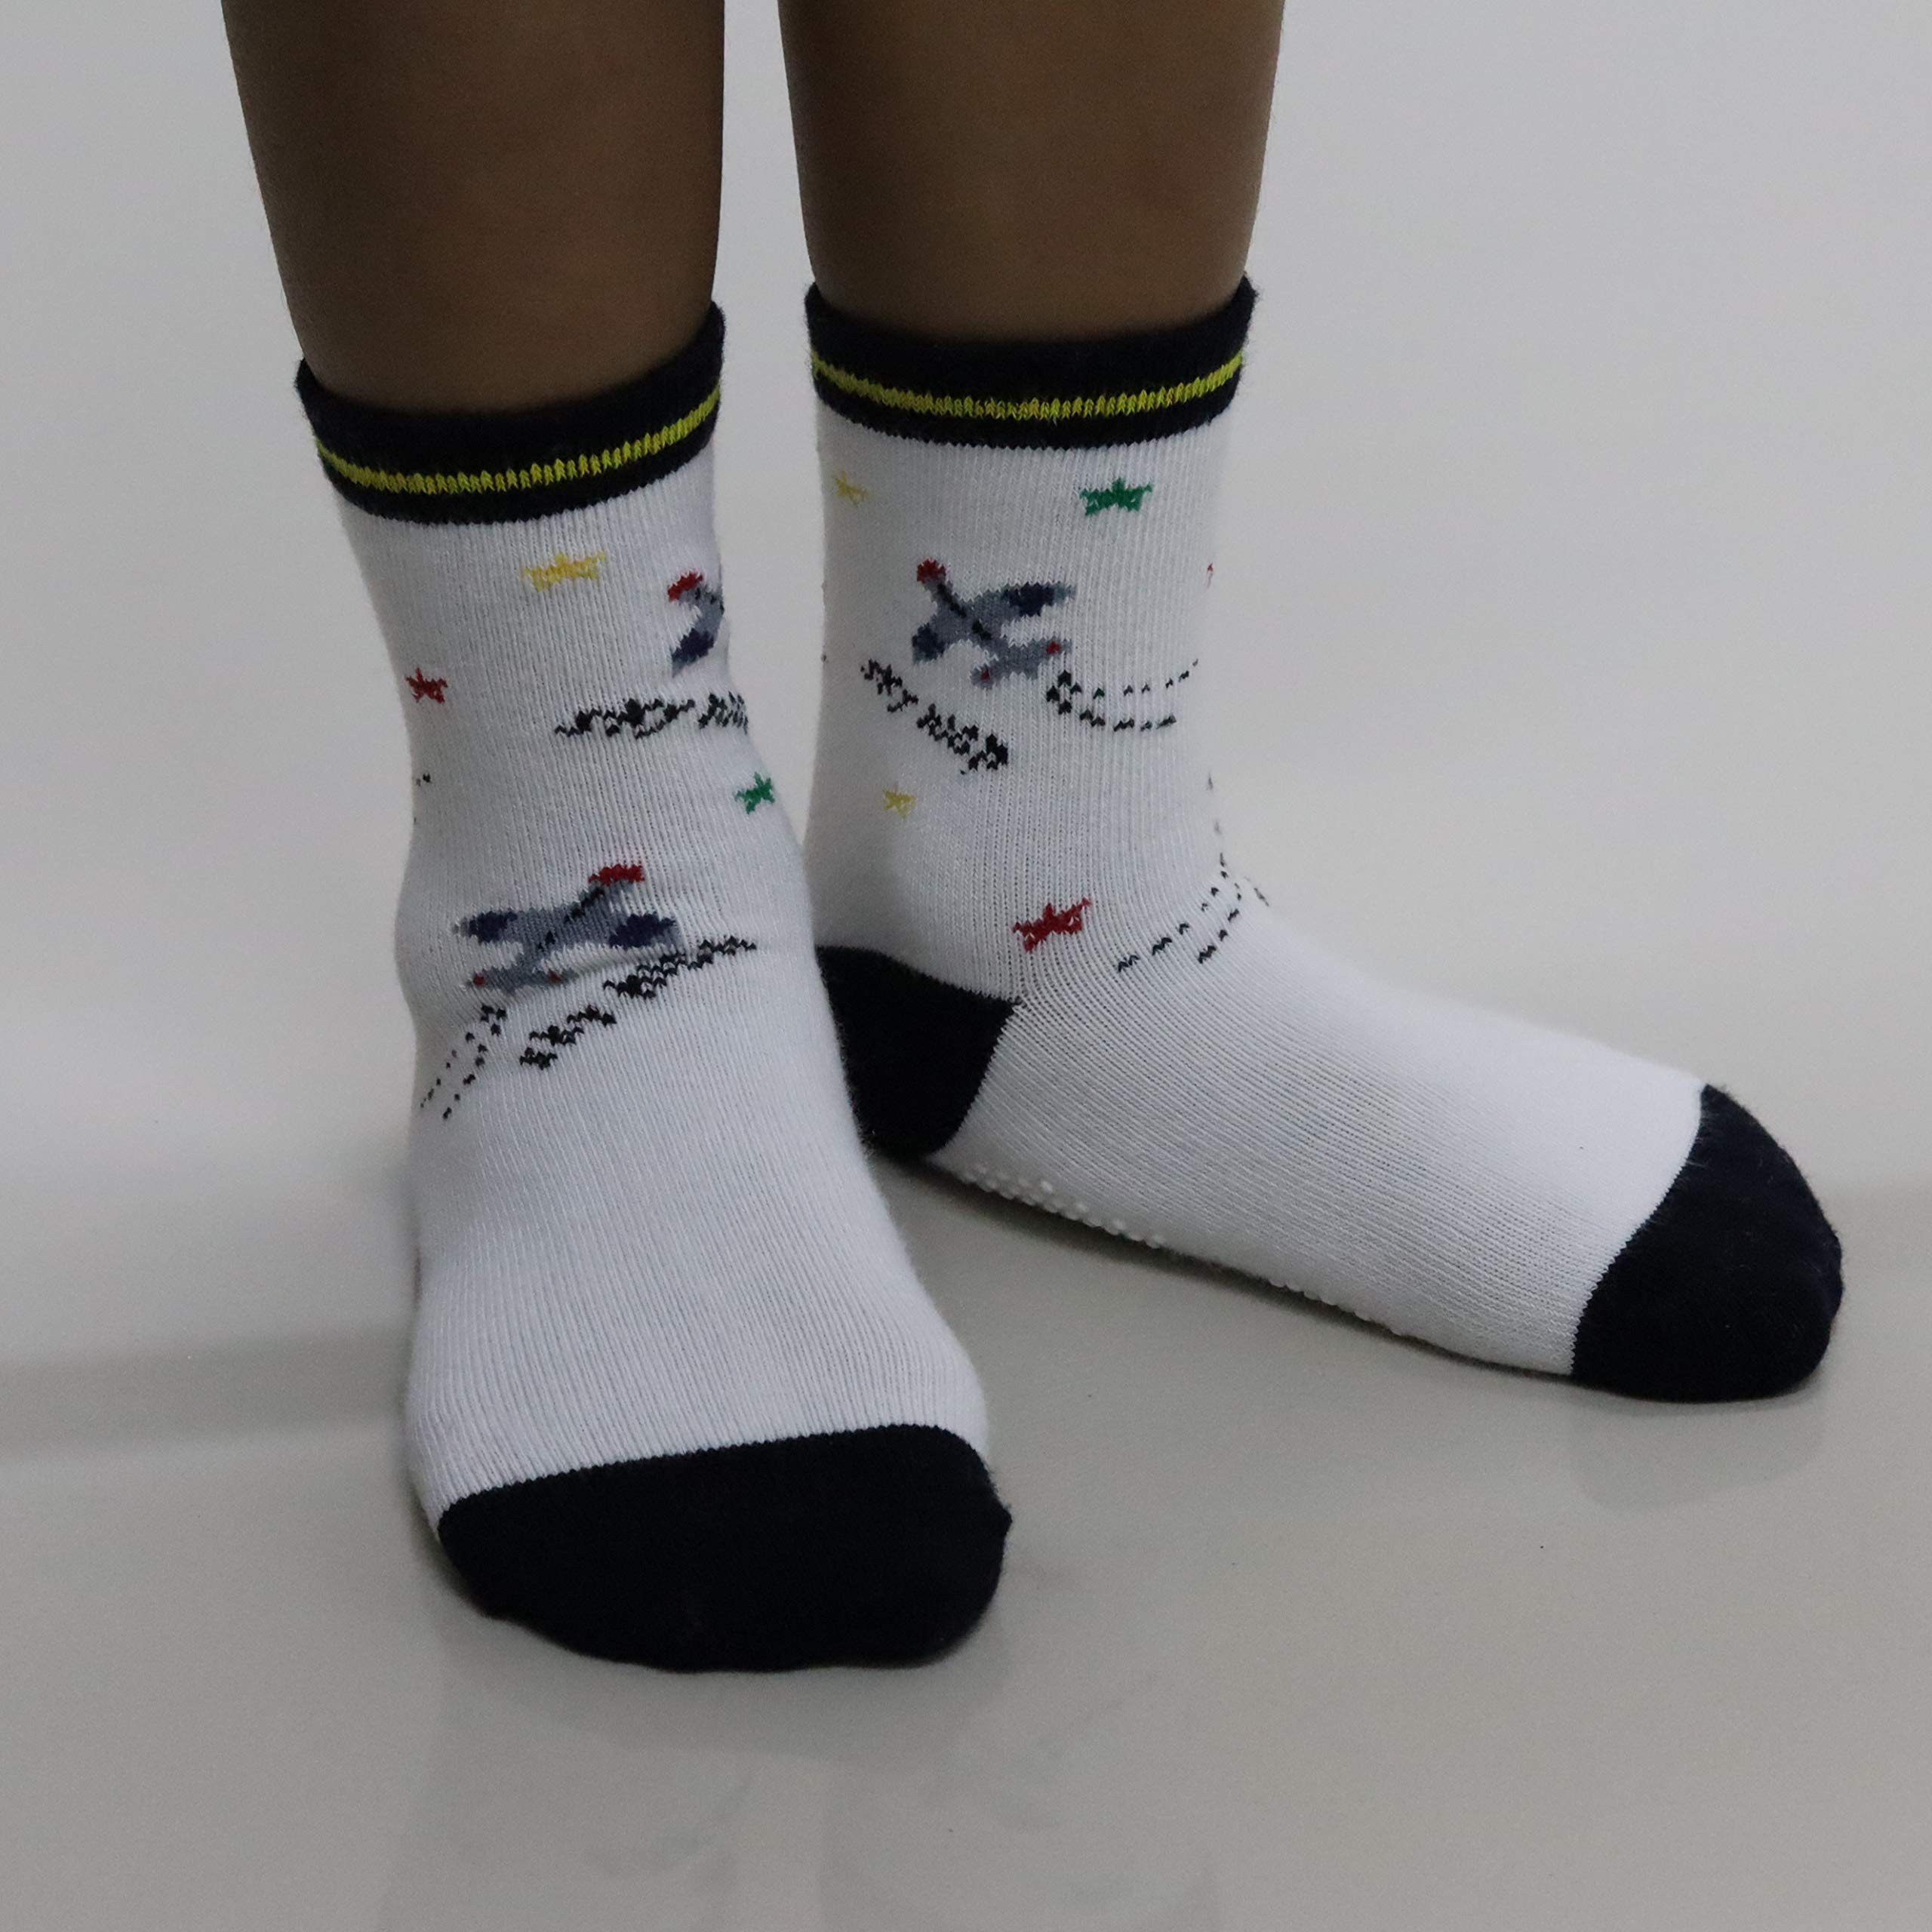 RATIVE RB-71112 Non Skid Anti Slip Crew Socks With Grips For Baby Toddlers Boys